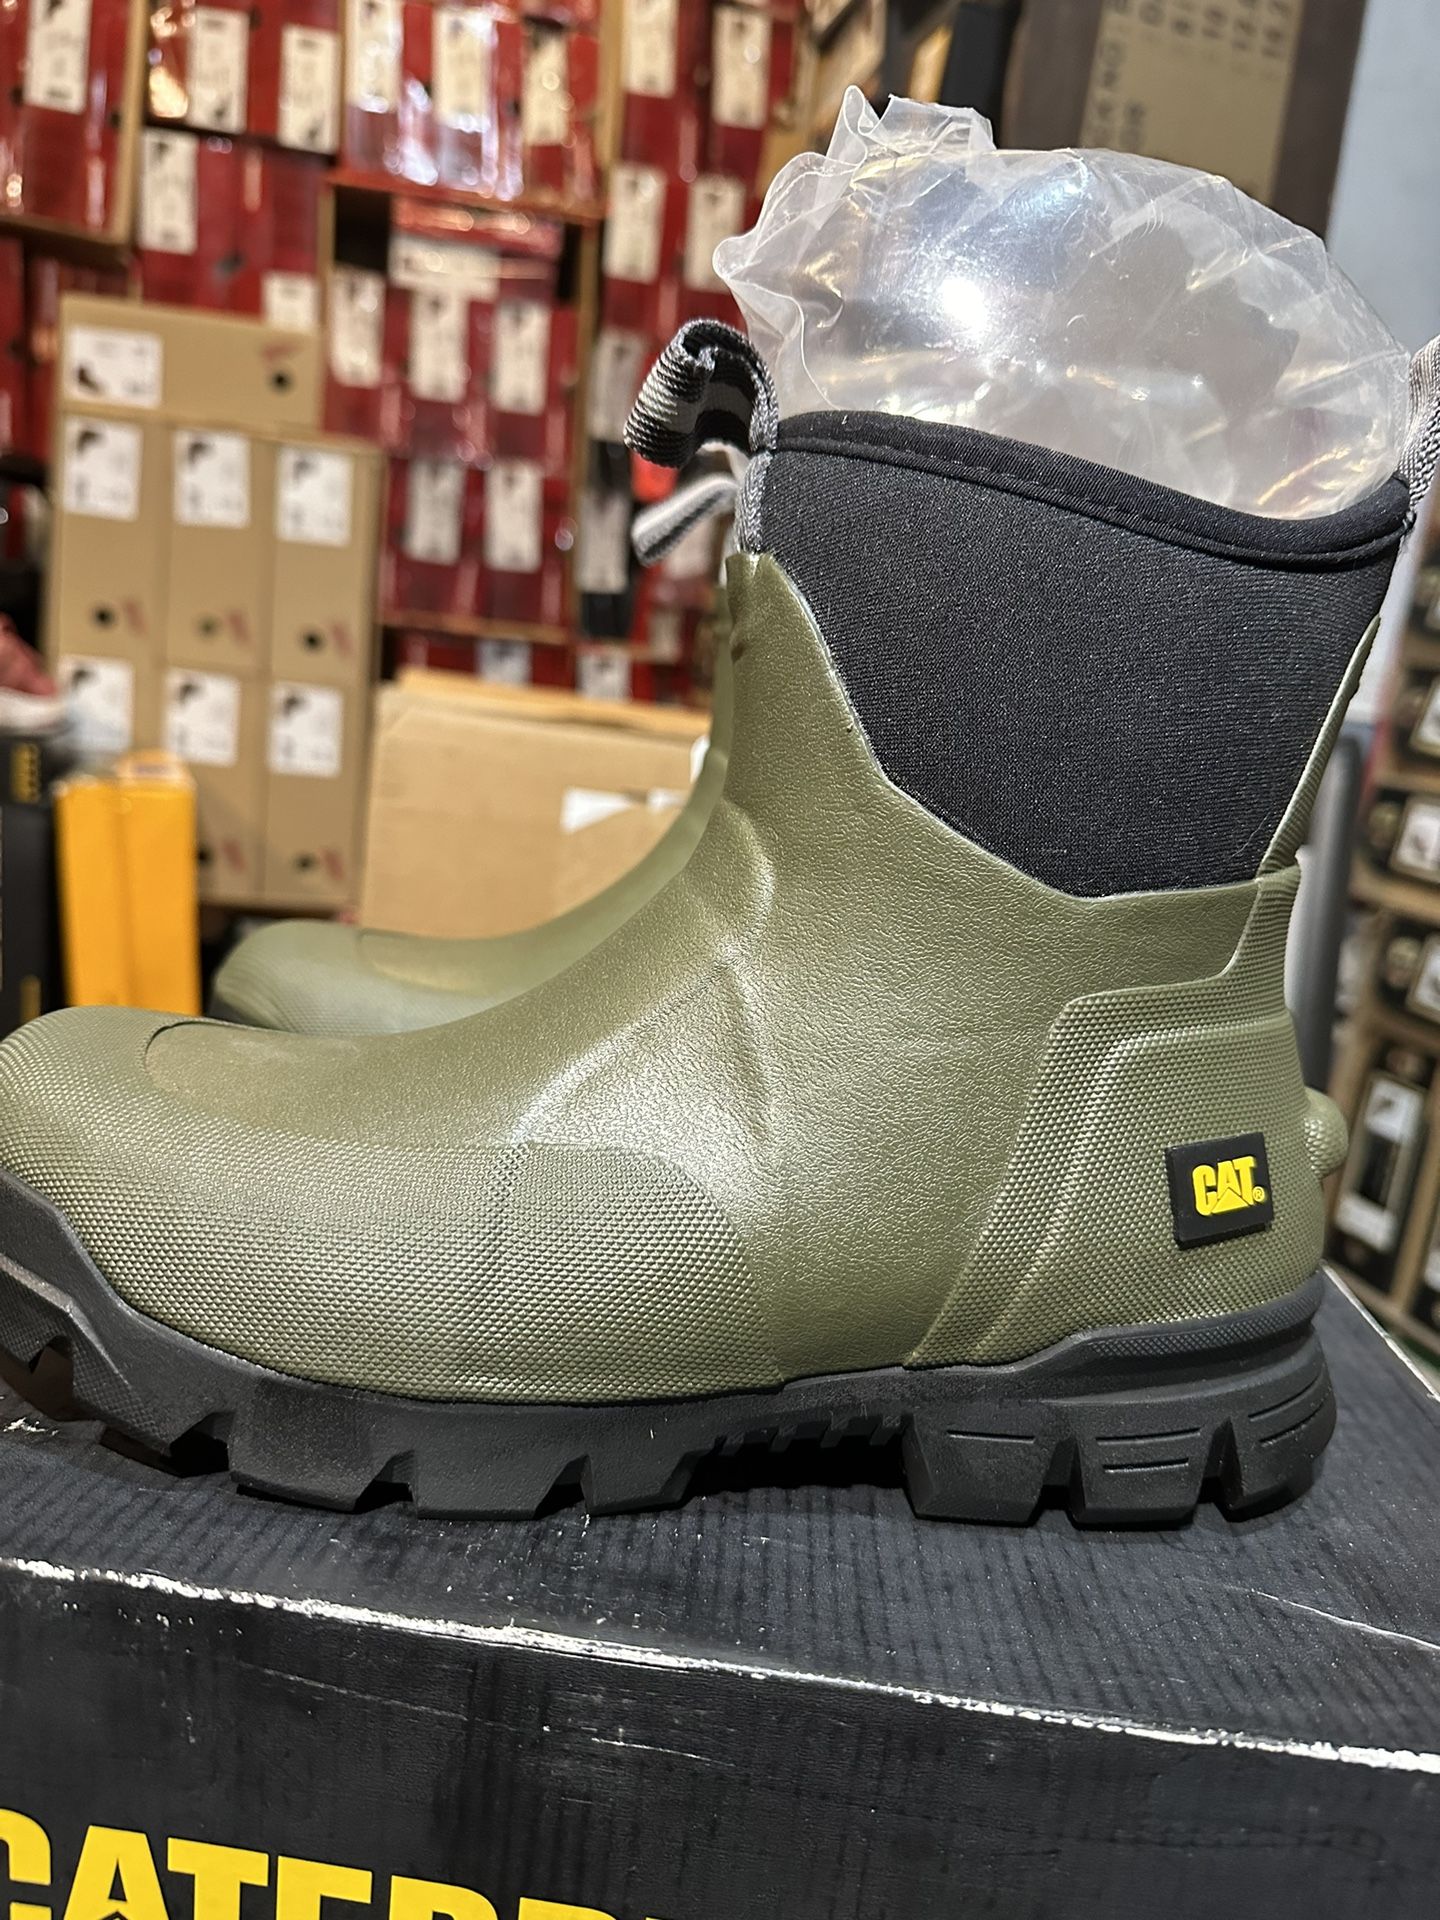 WORK BOOTS 🥾// CATERPILLAR STORMERS 6” Sort Toe // Size Available(7) (8)(9)(11)